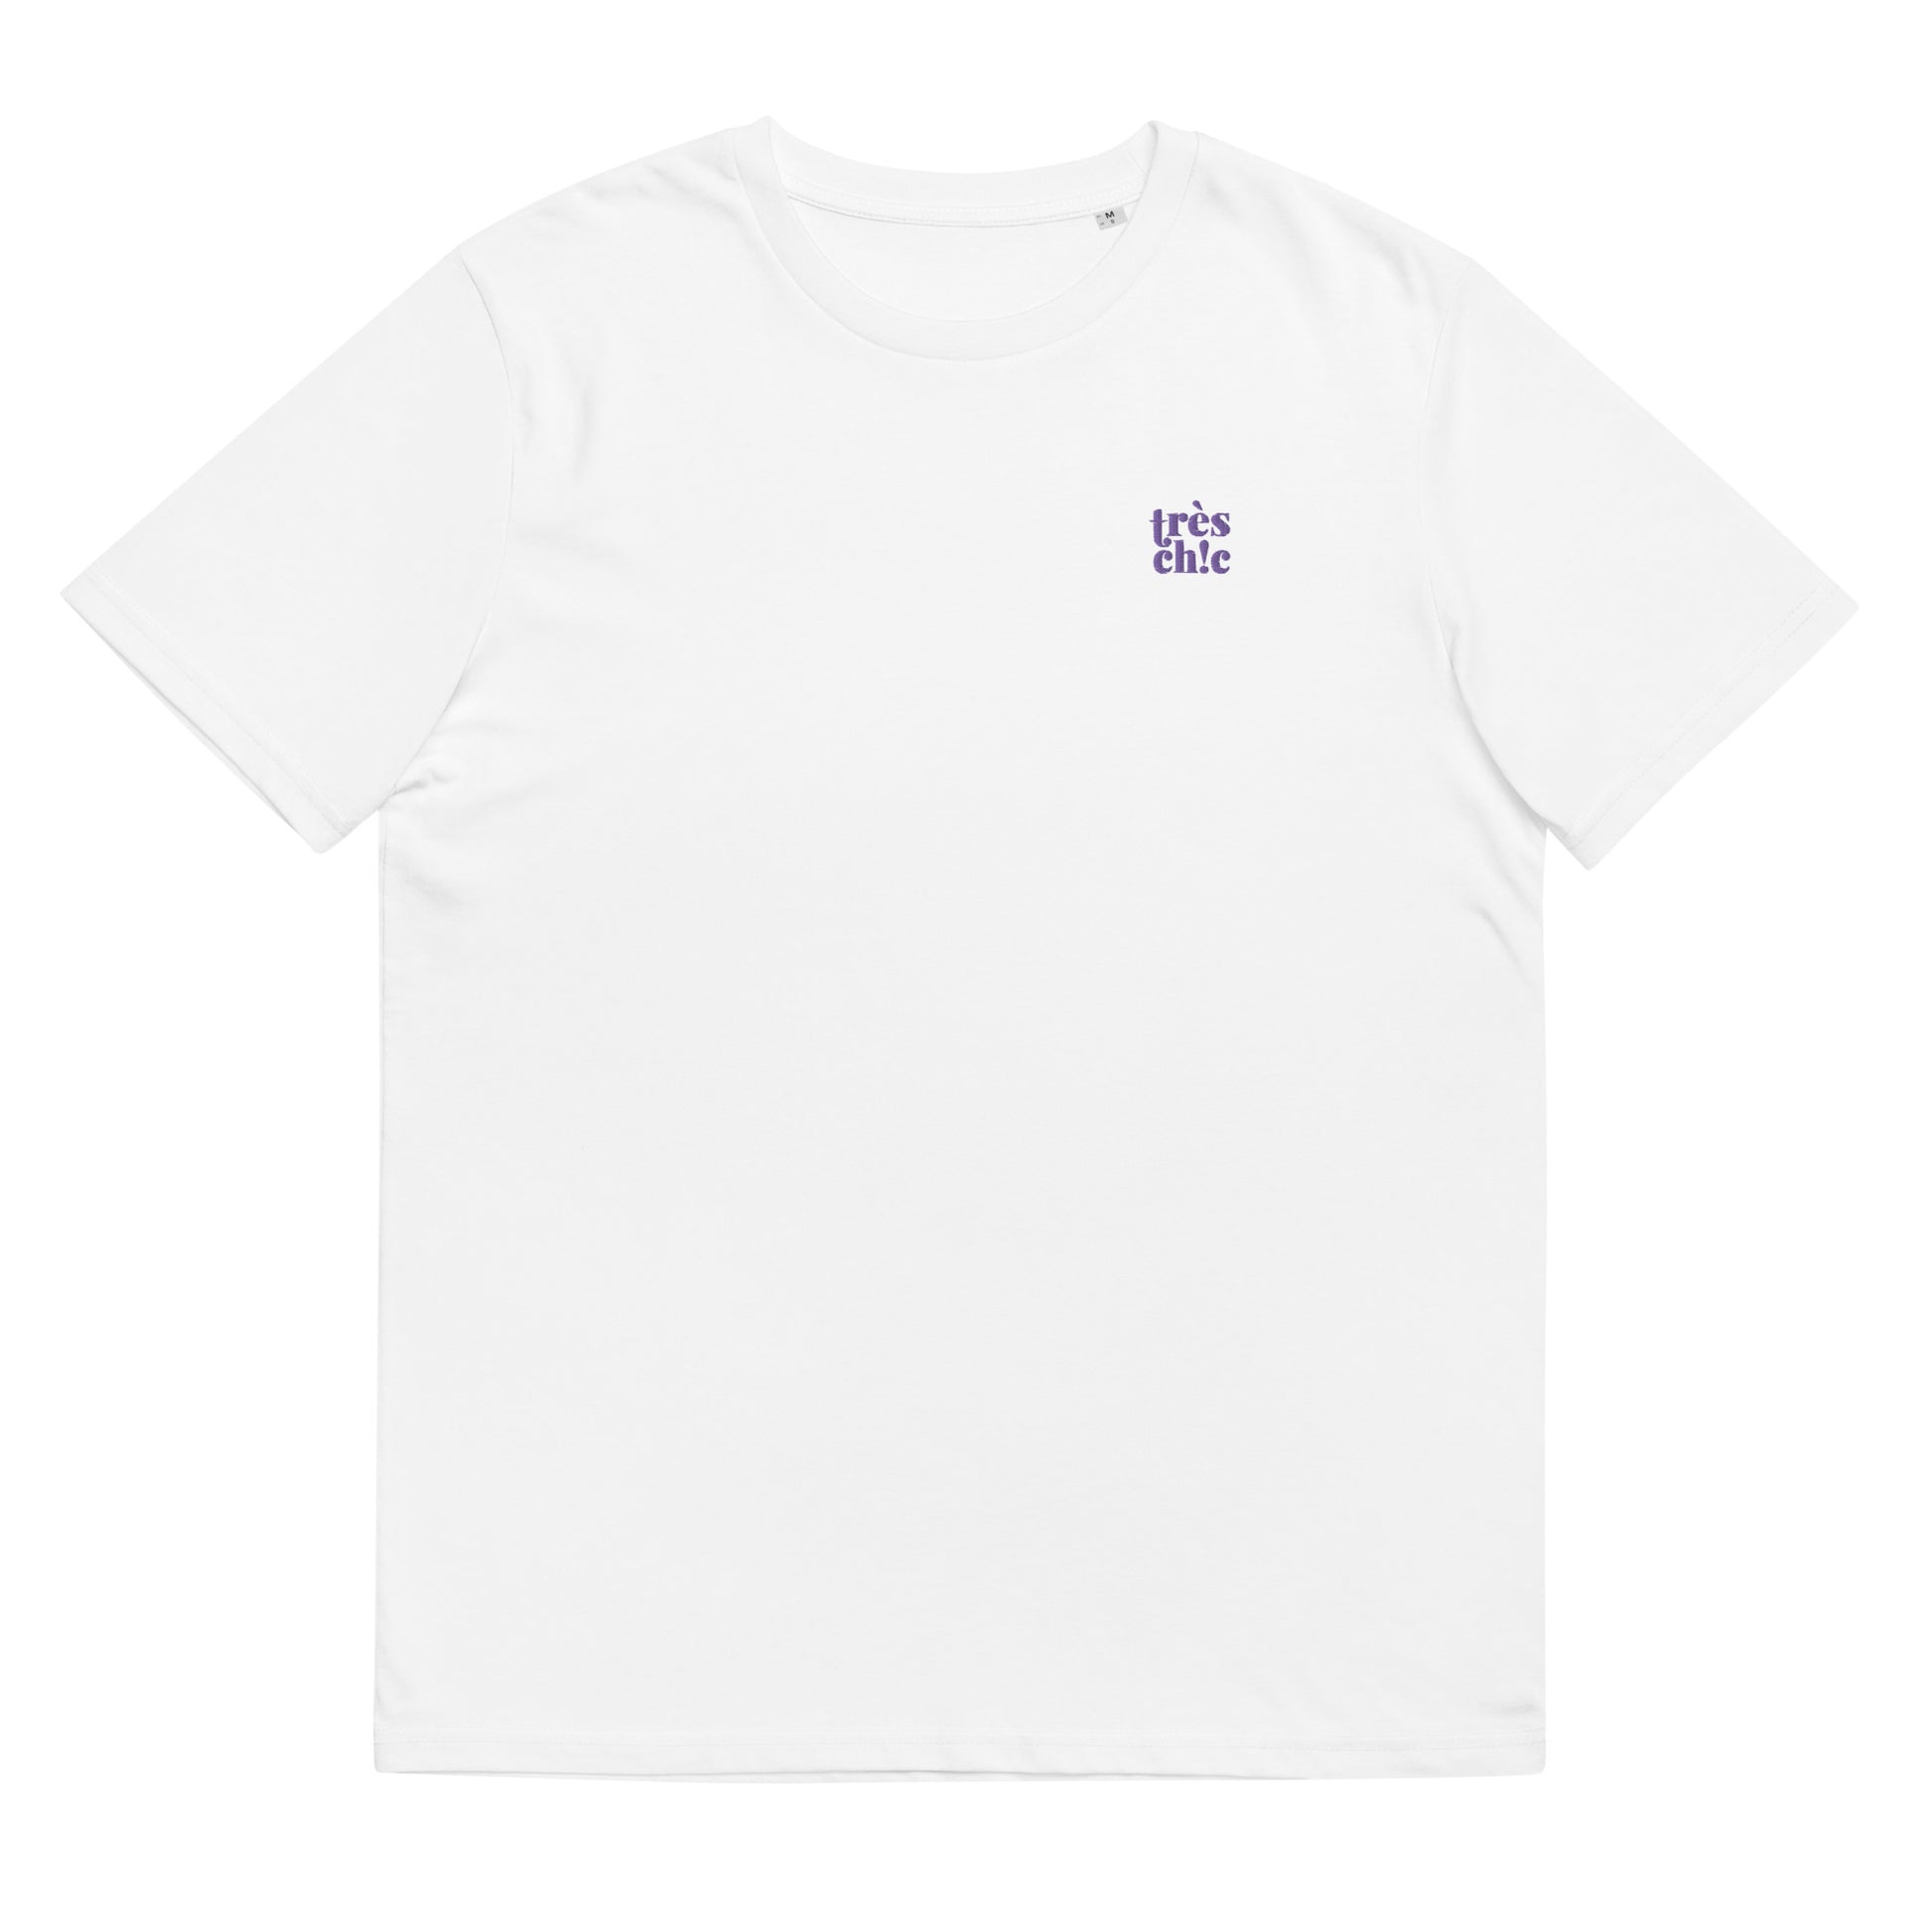 Fitted white organic cotton t-shirt with a small embroidery - "très chic" on the left chest. Available in sizes S to 3XL.